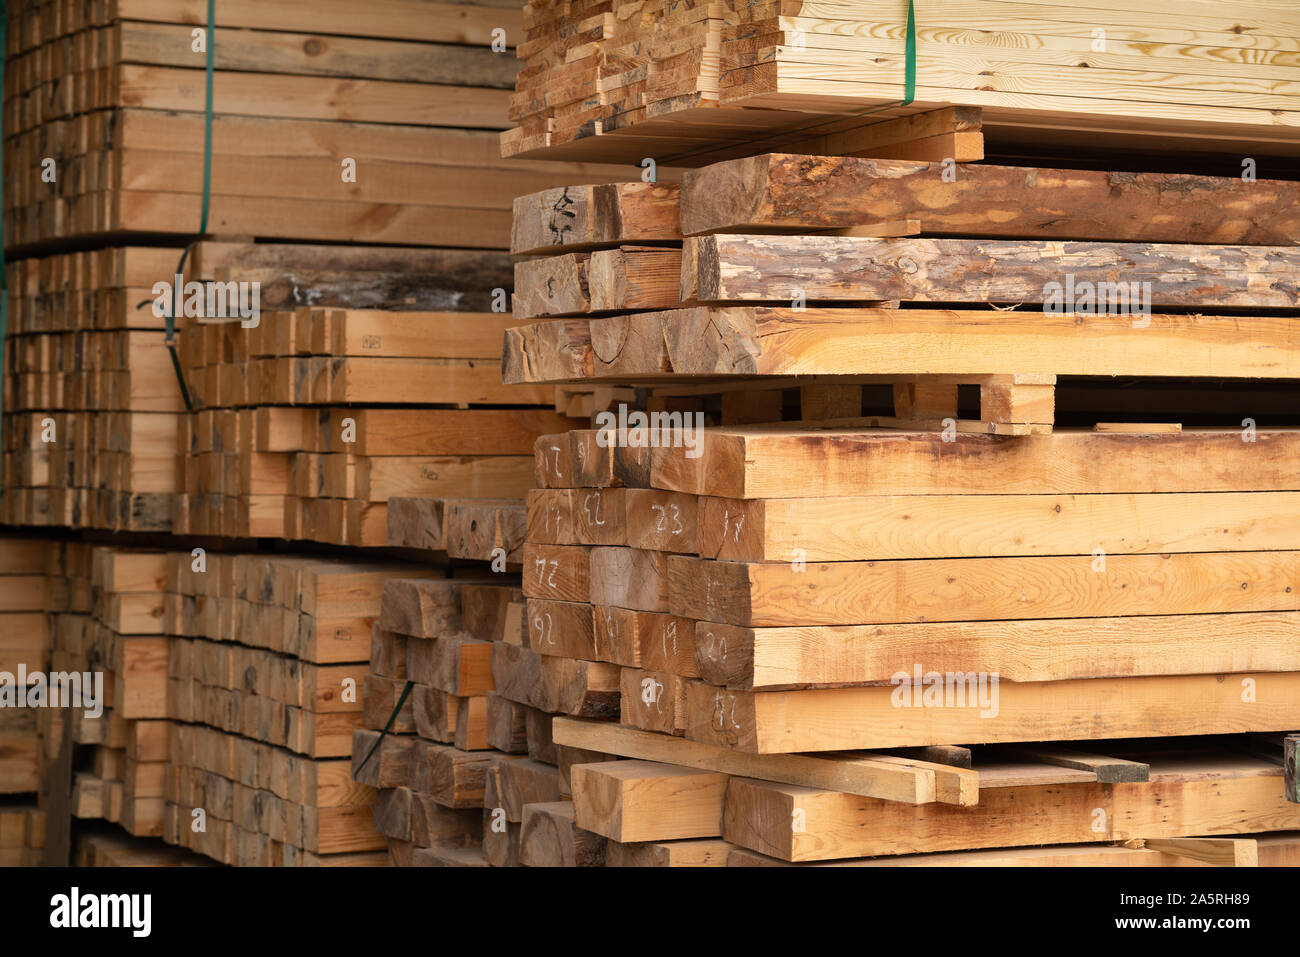 Satck of Timber are storaged in the wood warehouse. Stock Photo